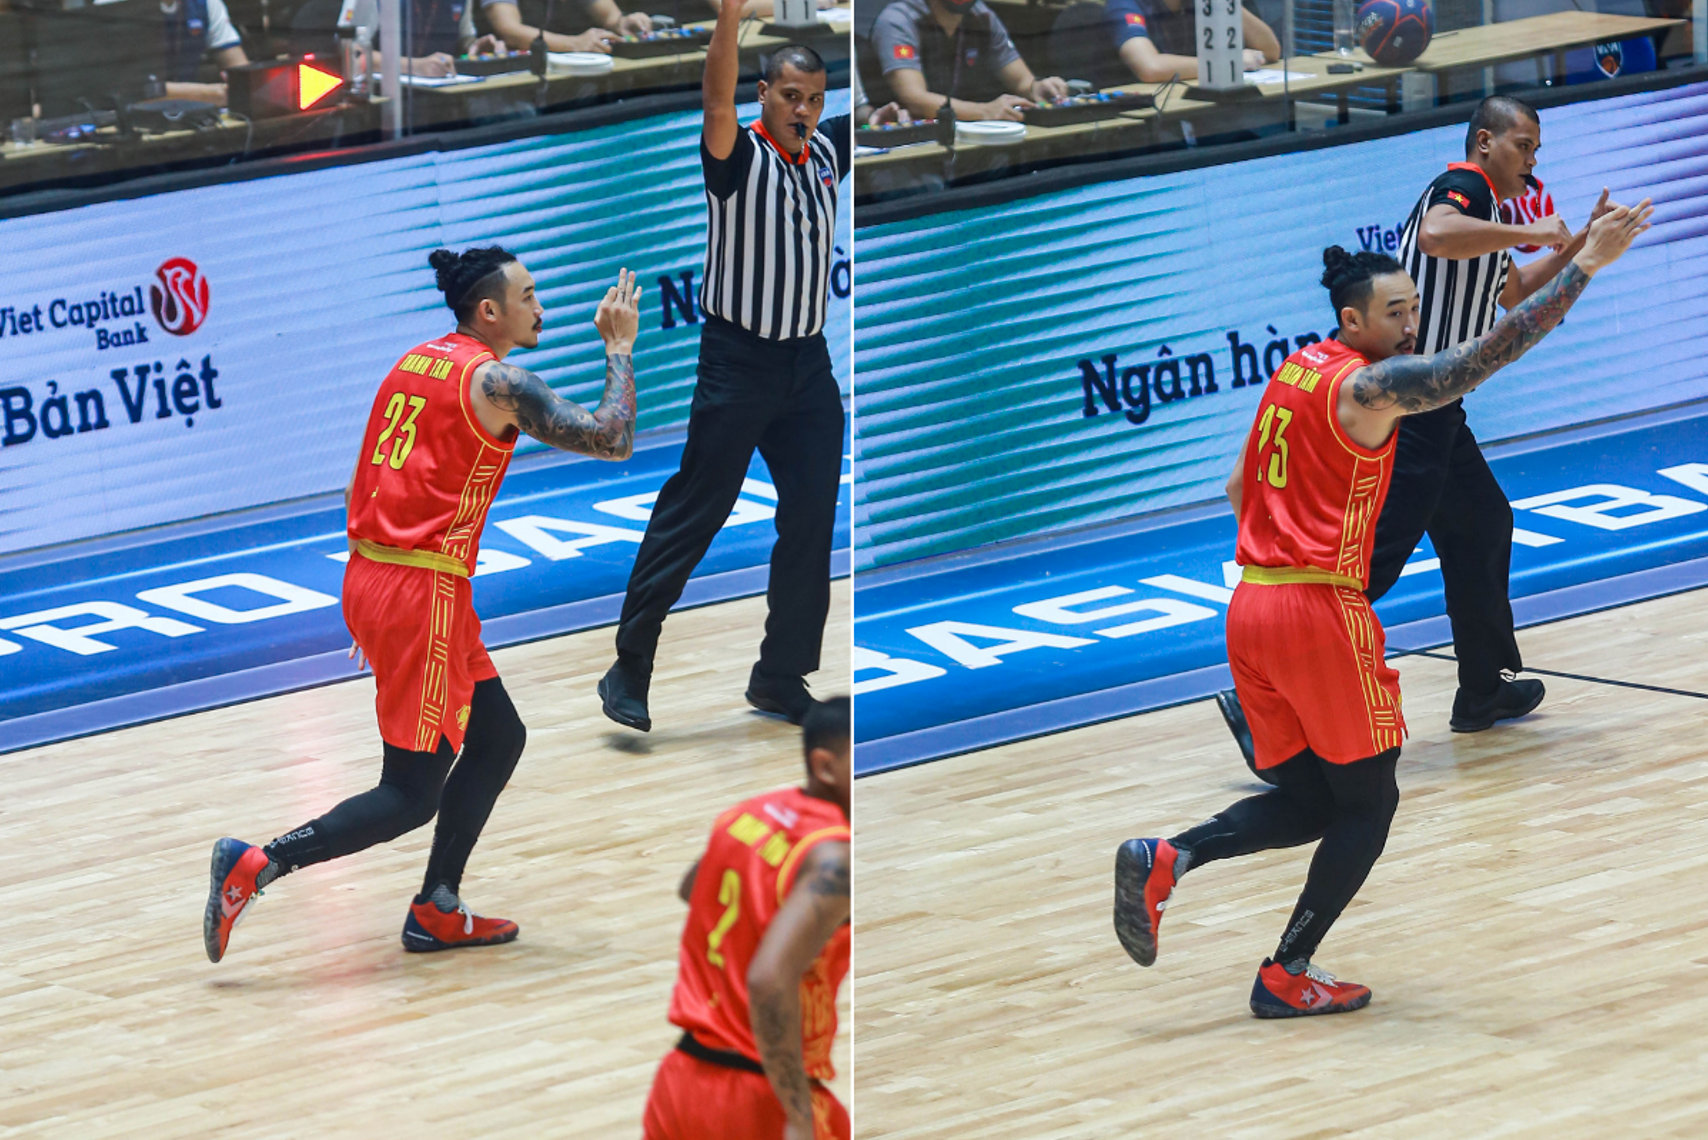 Tam Dinh of the Vietnamese national basketball team celebrates after sinking a three-pointer. Photo: VBA